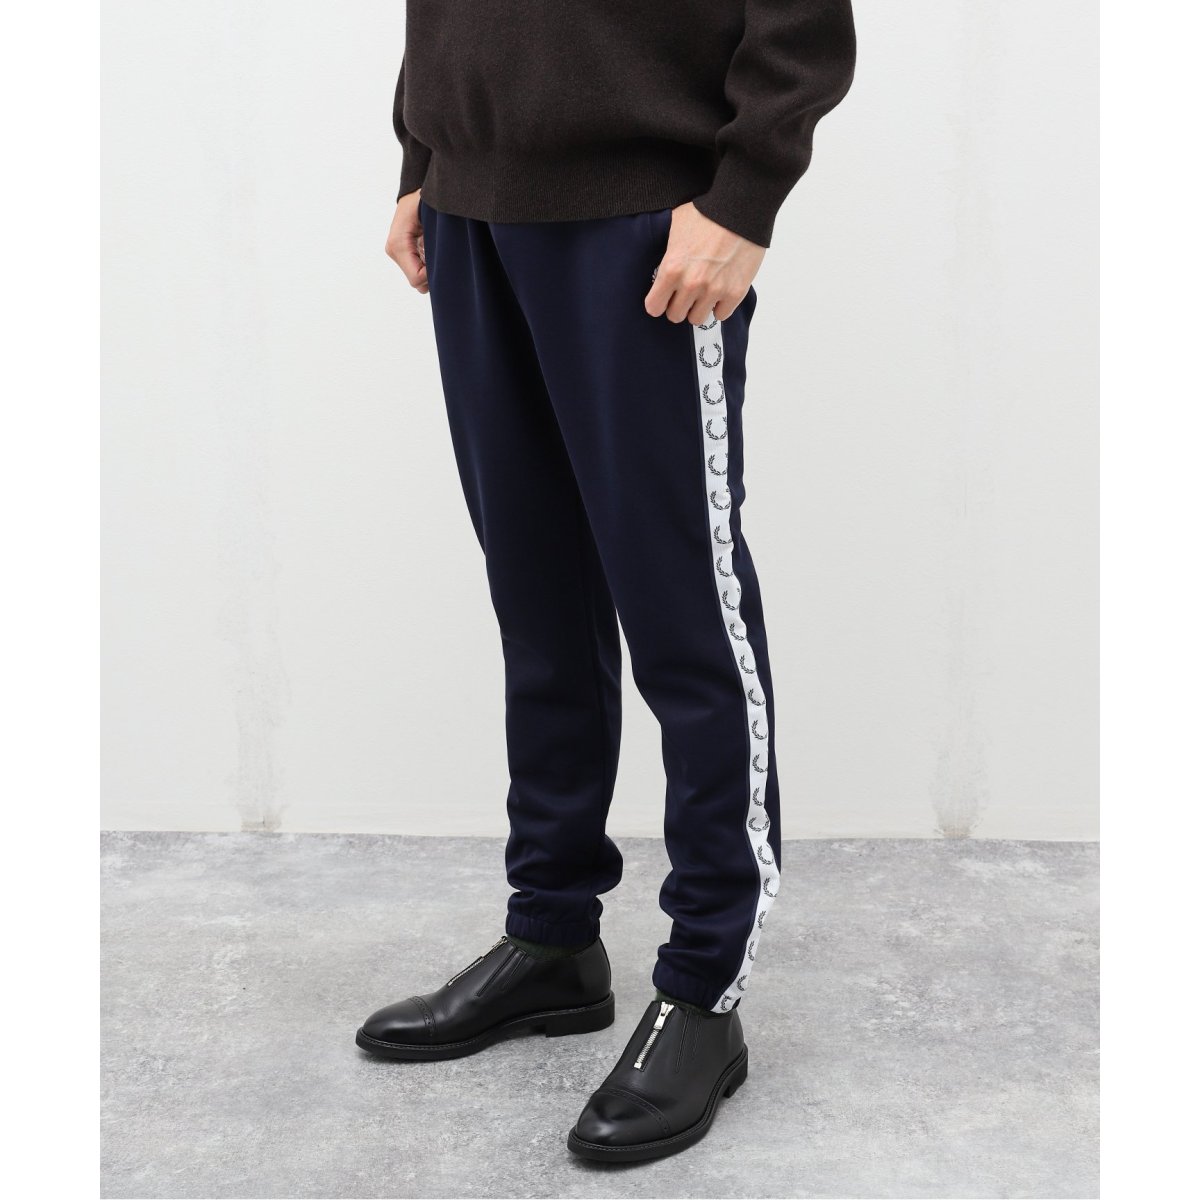 FRED PERRY / フレッド ペリー】Taped Track Pant | エディフィス